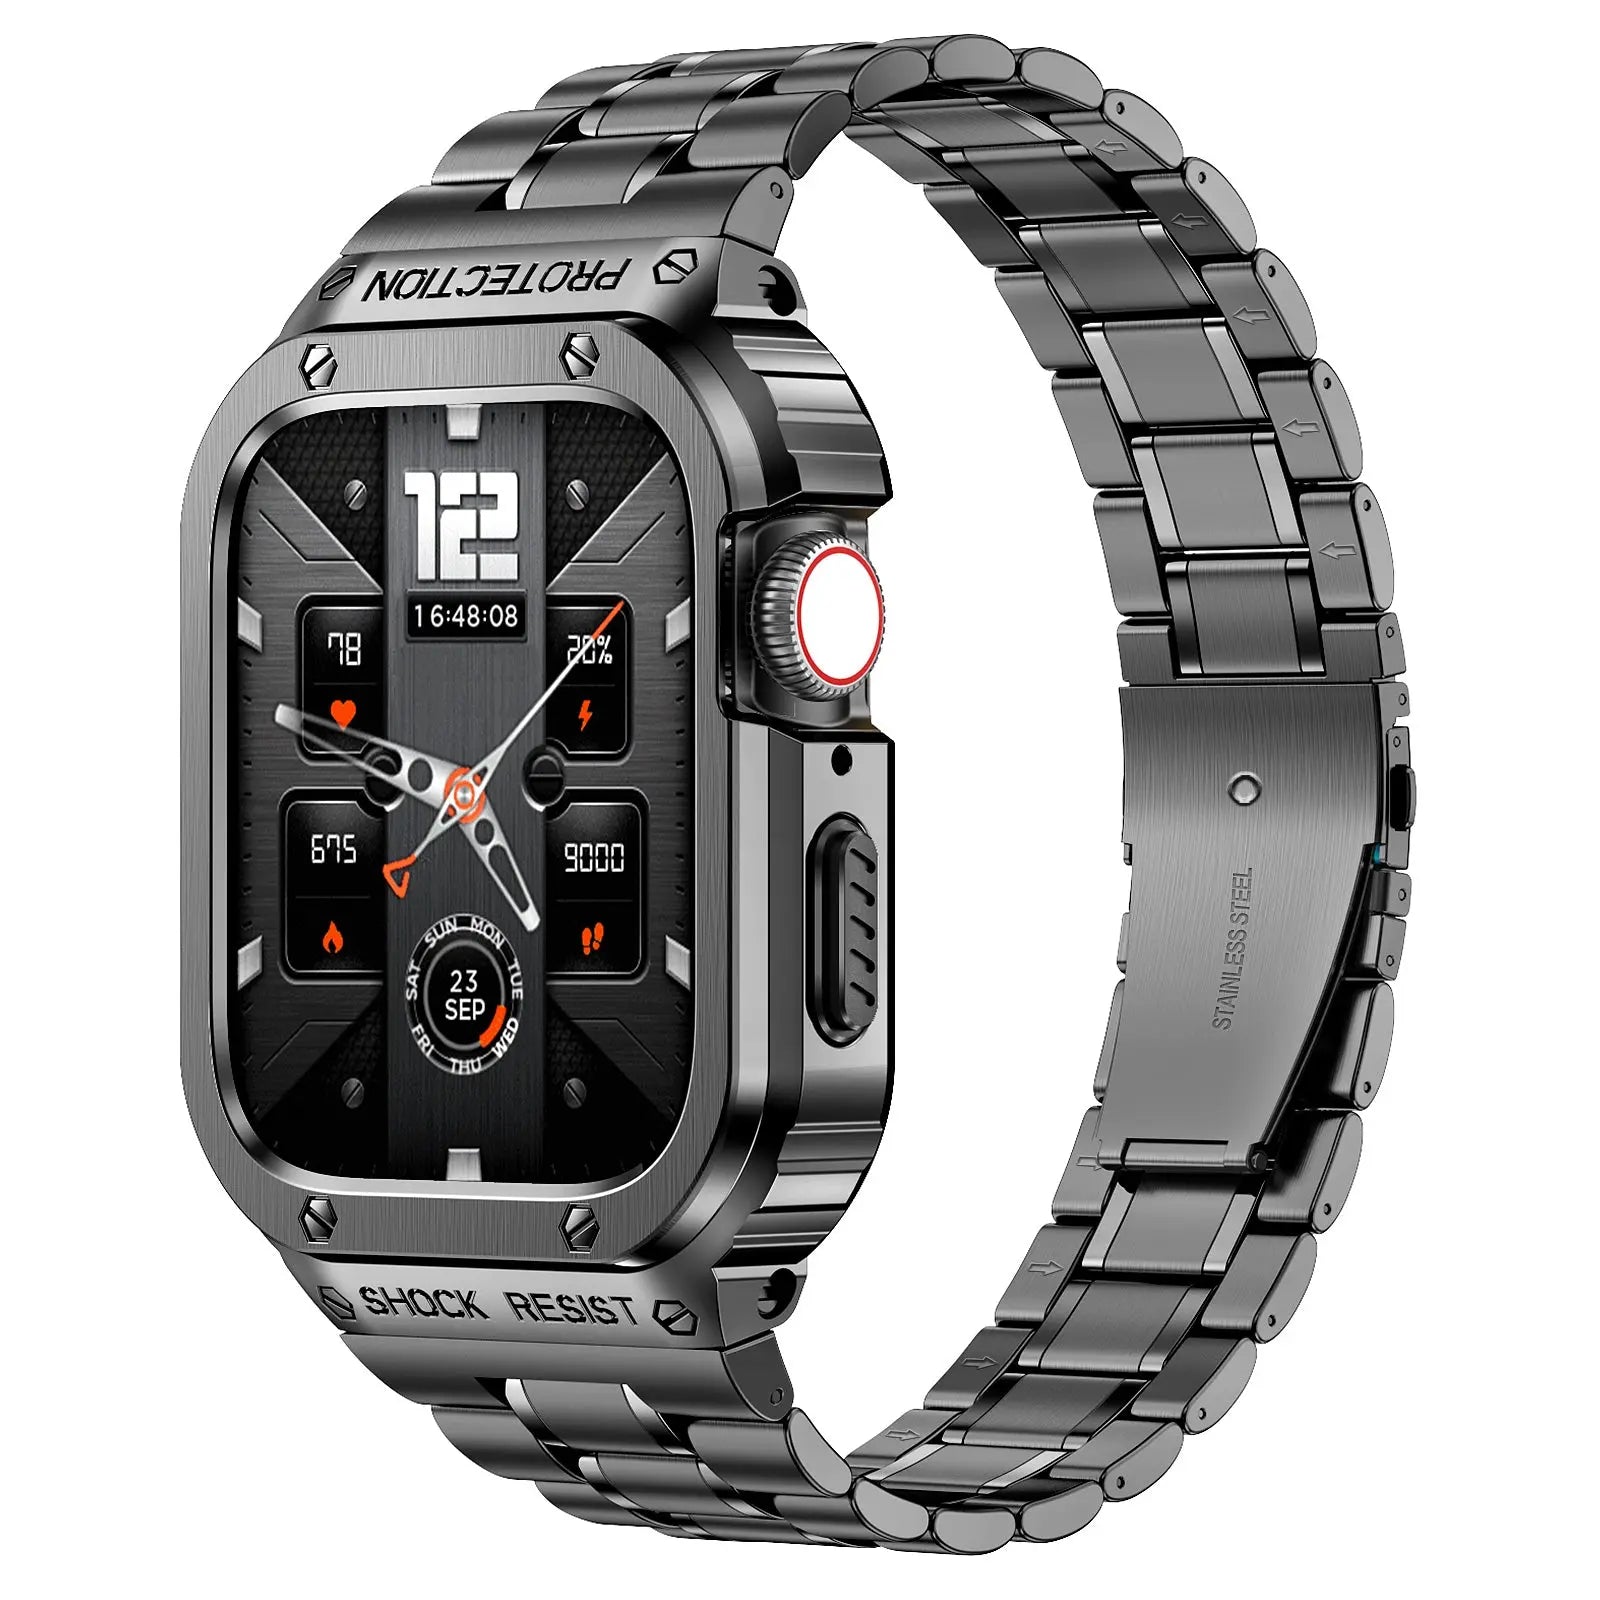 Pinnacle Stainless Steel Band And Case For Apple Watch - Pinnacle Luxuries